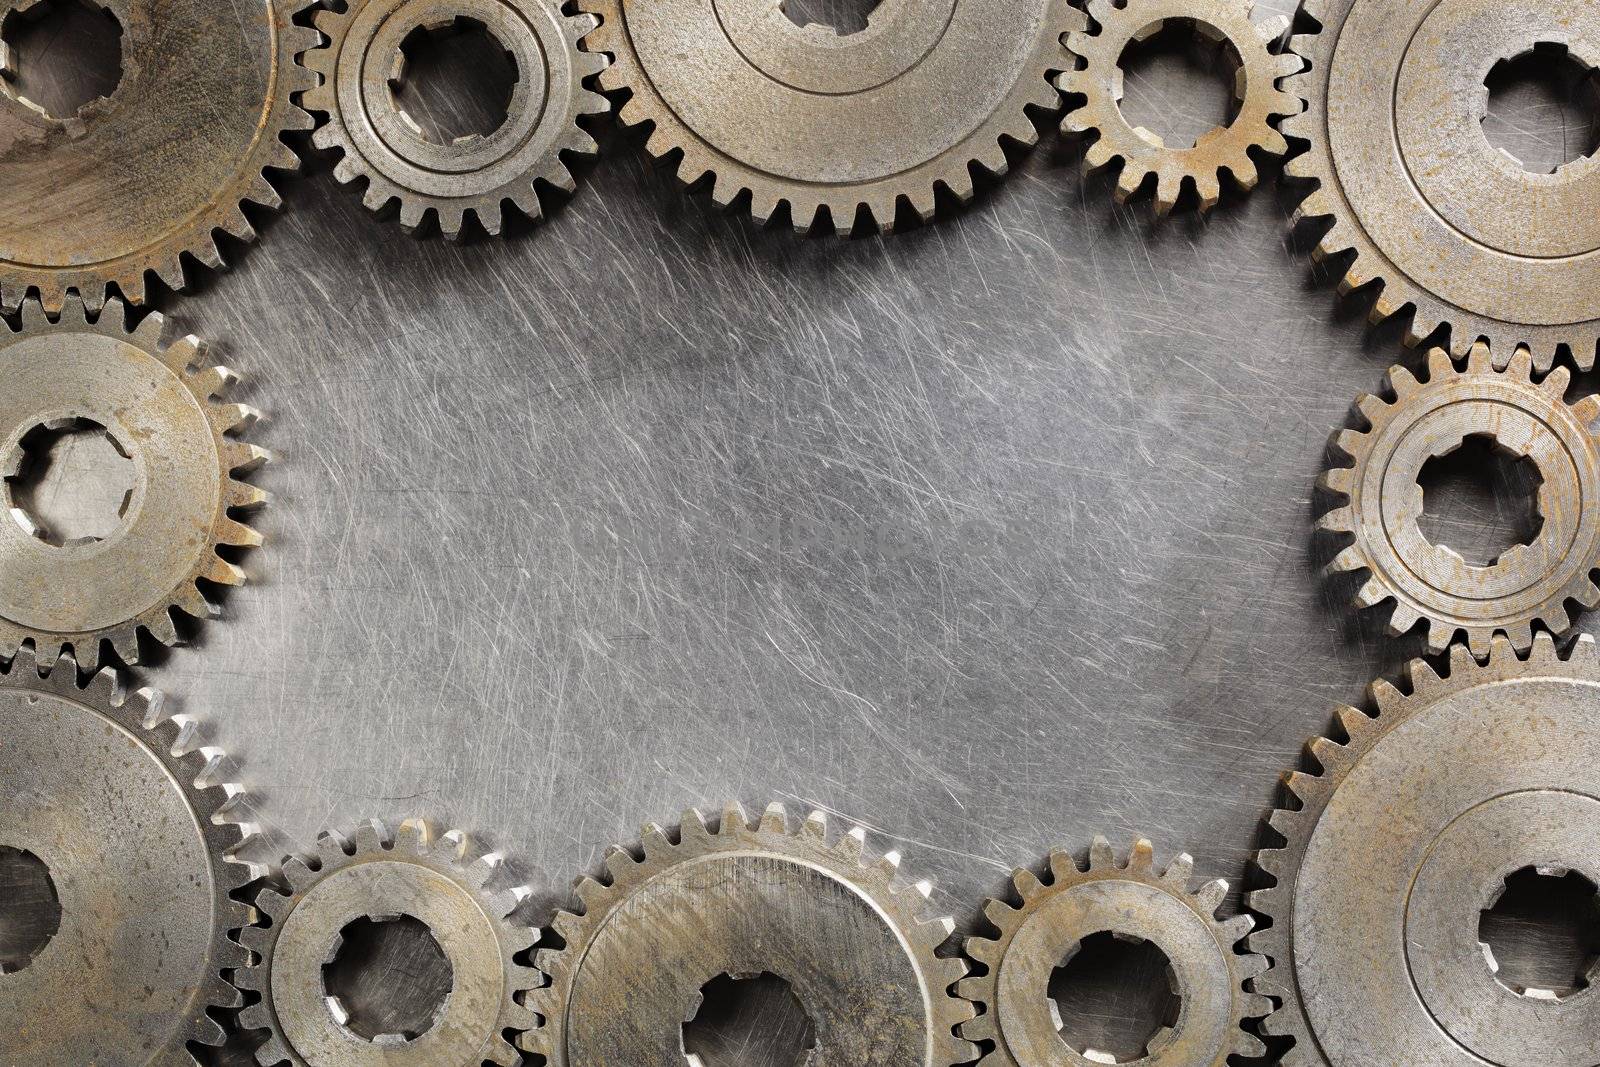 Background image made of steel and old cog wheels.